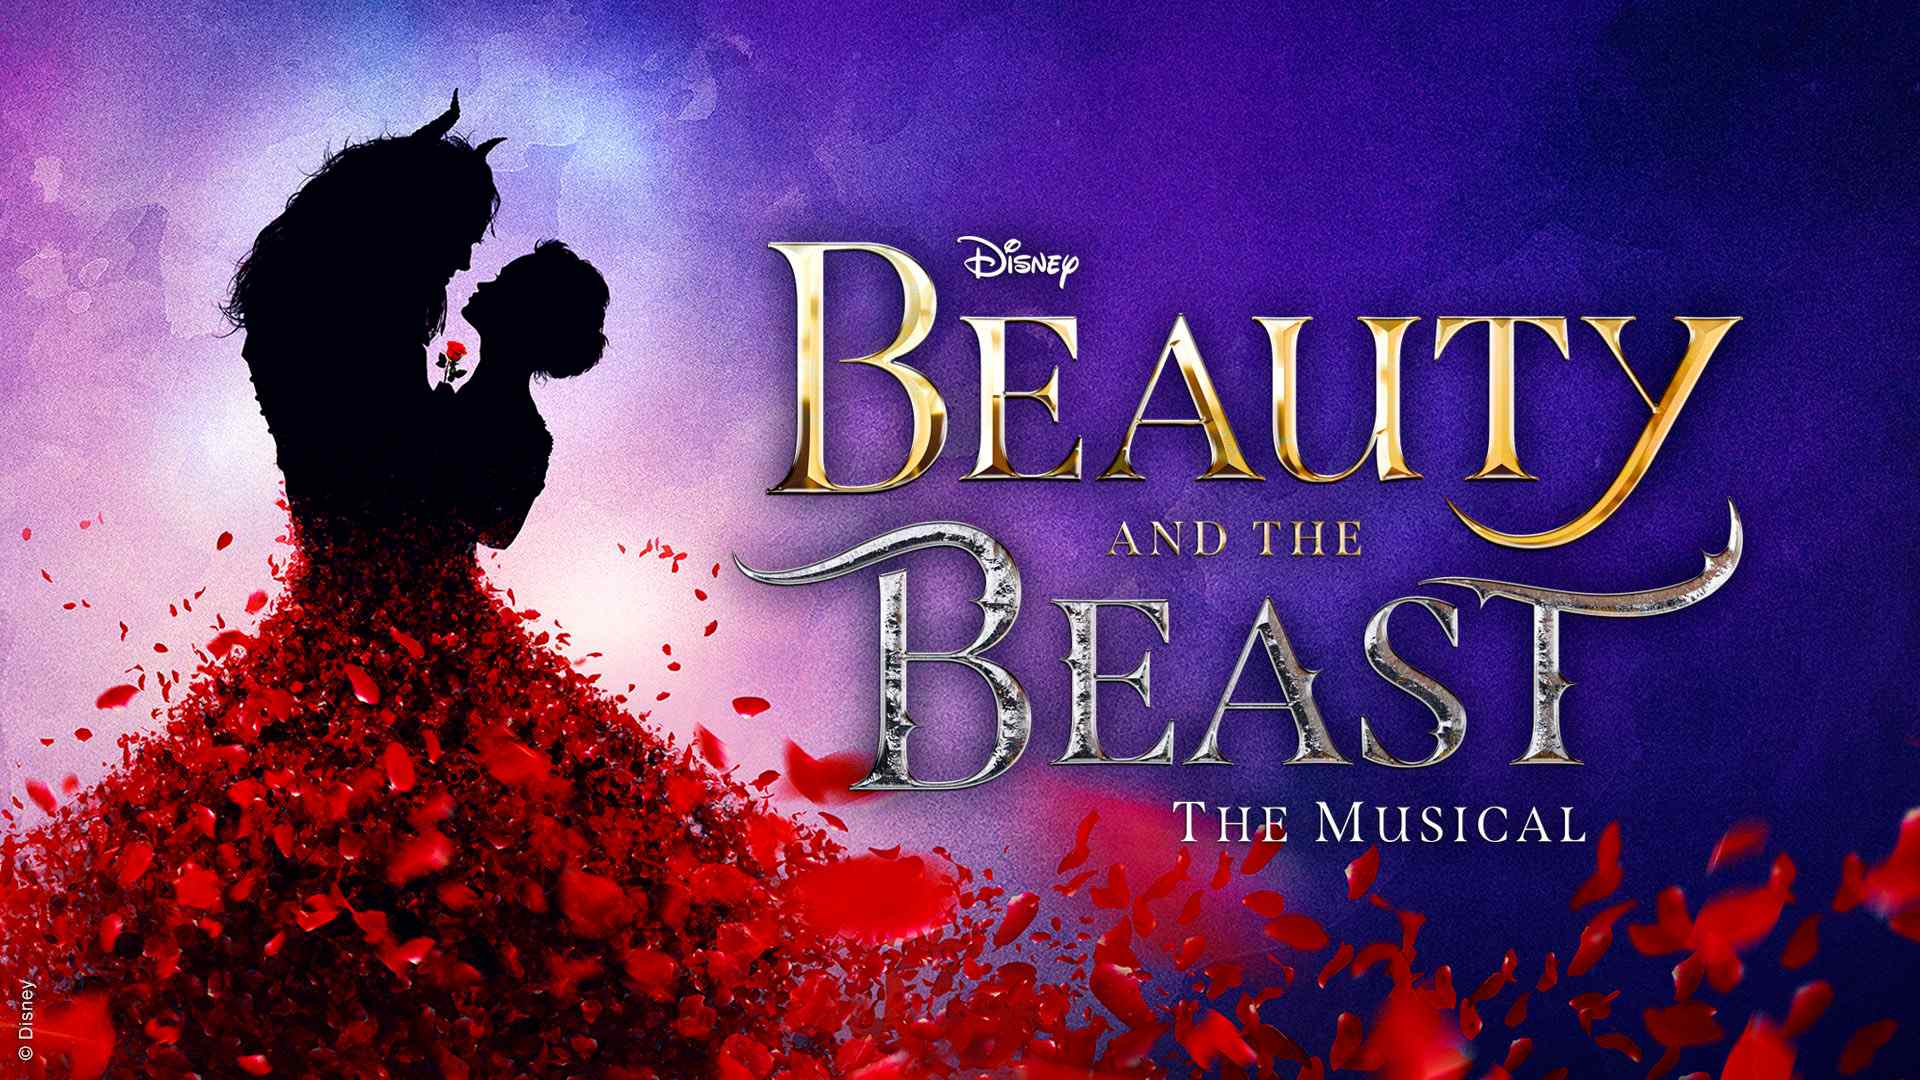 Enjoy the songs from Alan Menken, Howard Ashman, and Tim Rice as the creative team reunites. Buy 'Beauty And The Beast' tickets.